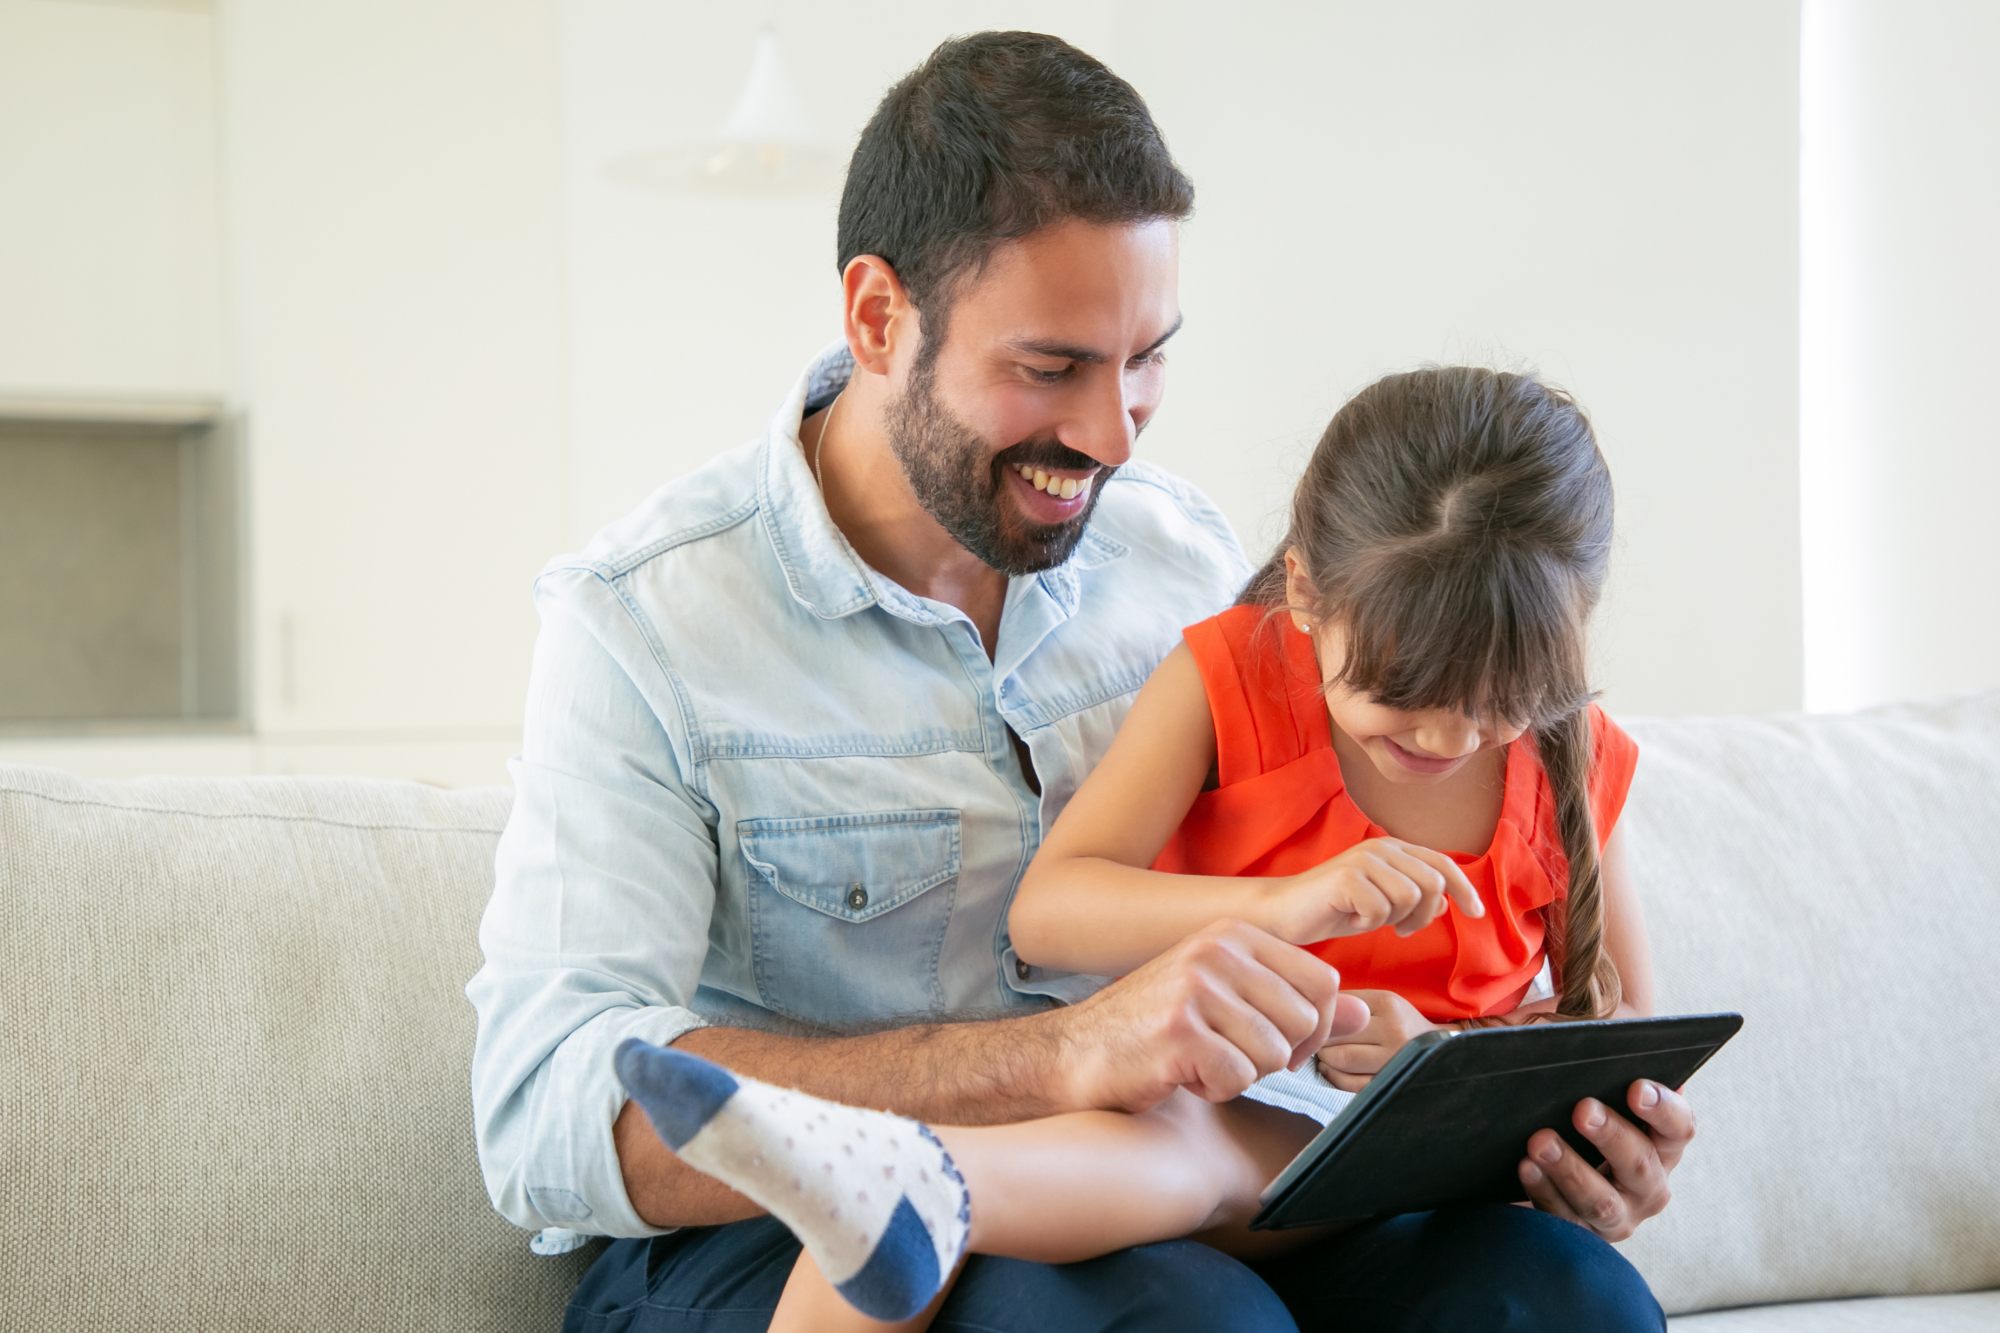 A child enjoys a learning app for kids on a tablet